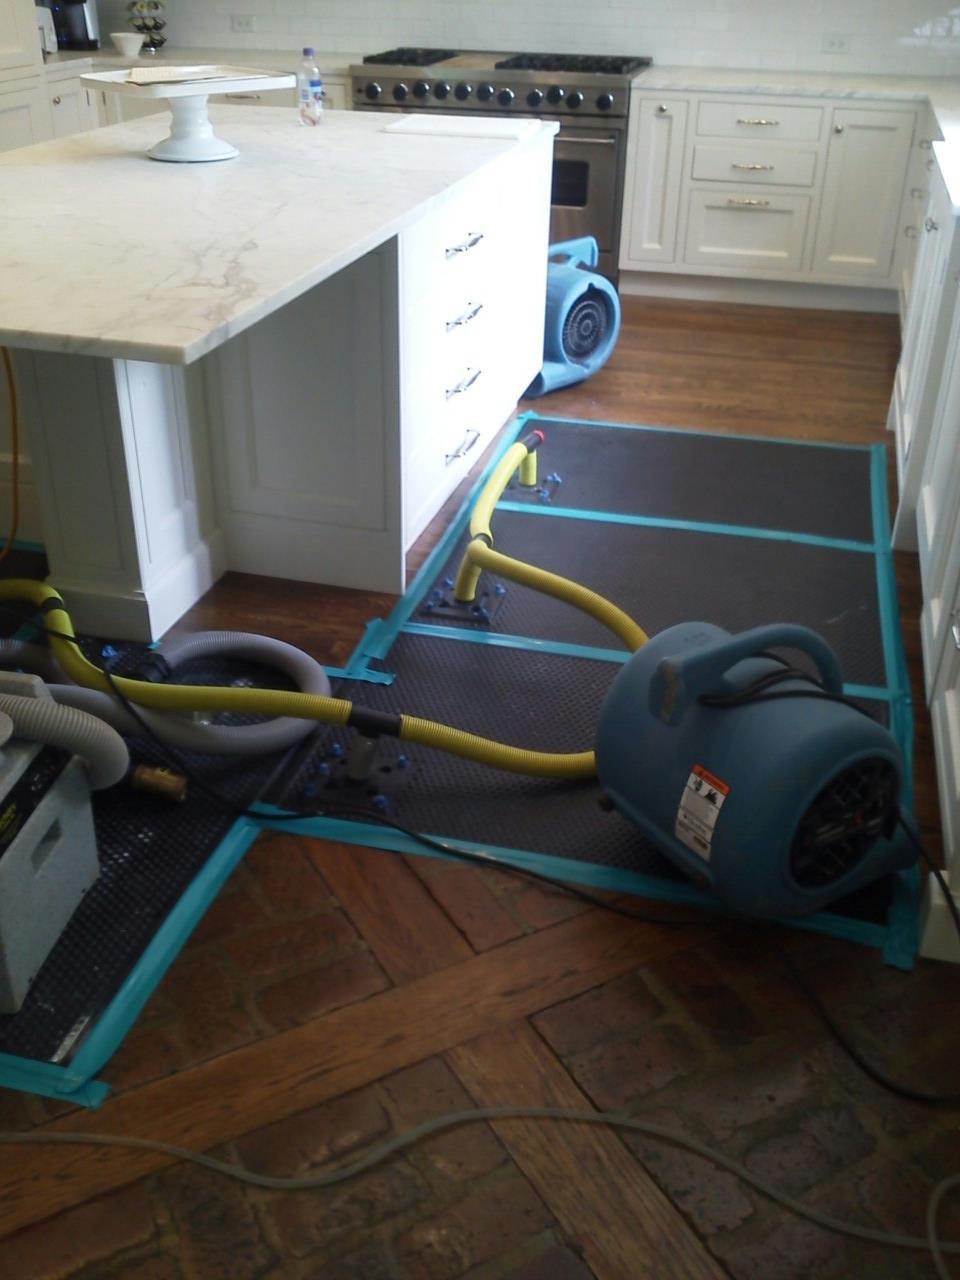 a vacuum cleaner on the floor